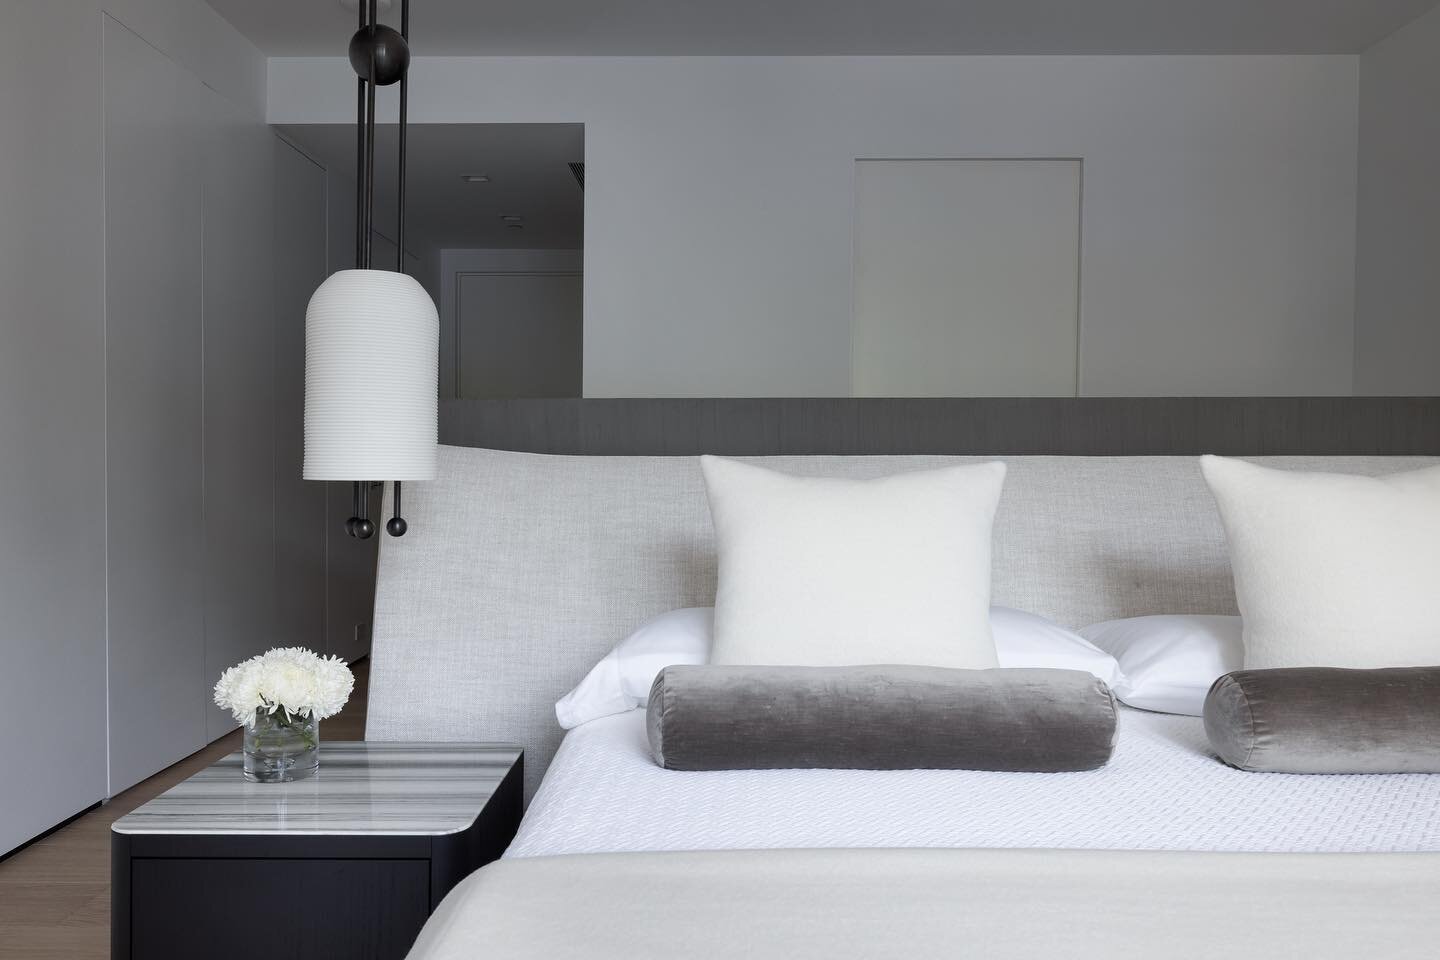 For our client, there&rsquo;s no better space to wake up in: minimal yet cozy. 

Photo: @stovallstudio 

#interior #interiordesign #deco #instadecor #homedecor #interiordesigner #luxurydesign #luxurymodern #luxuryhome #luxuryrealestate #modernluxury 